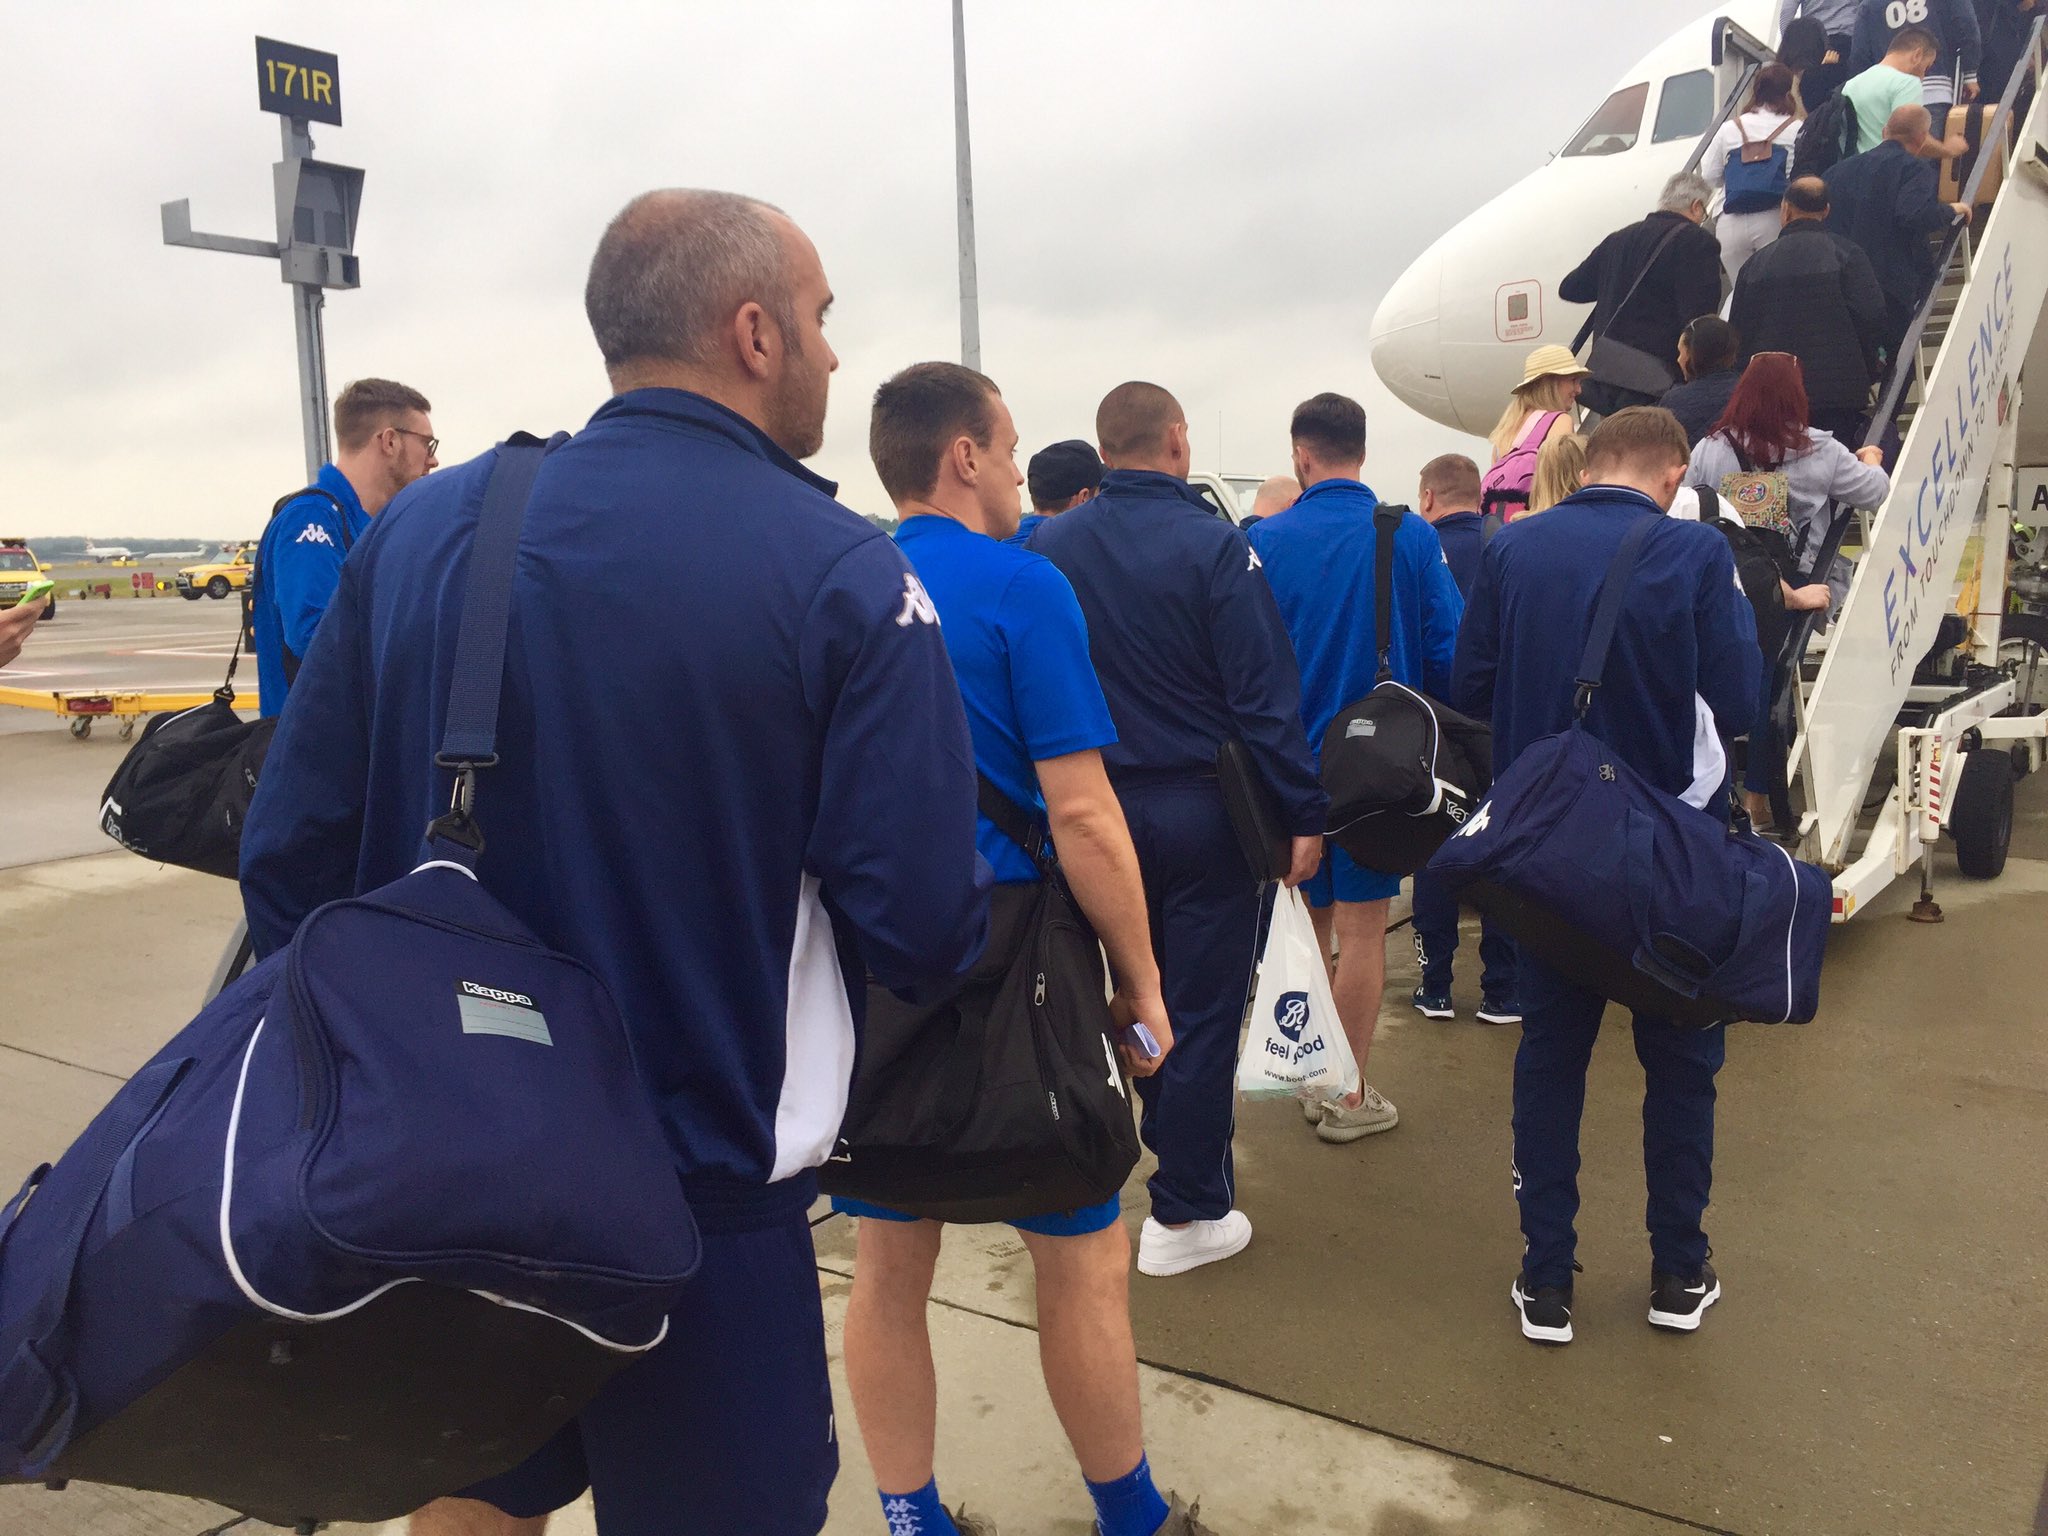 Bangor City FC on Twitter: "#Citizens have arrived at the ...